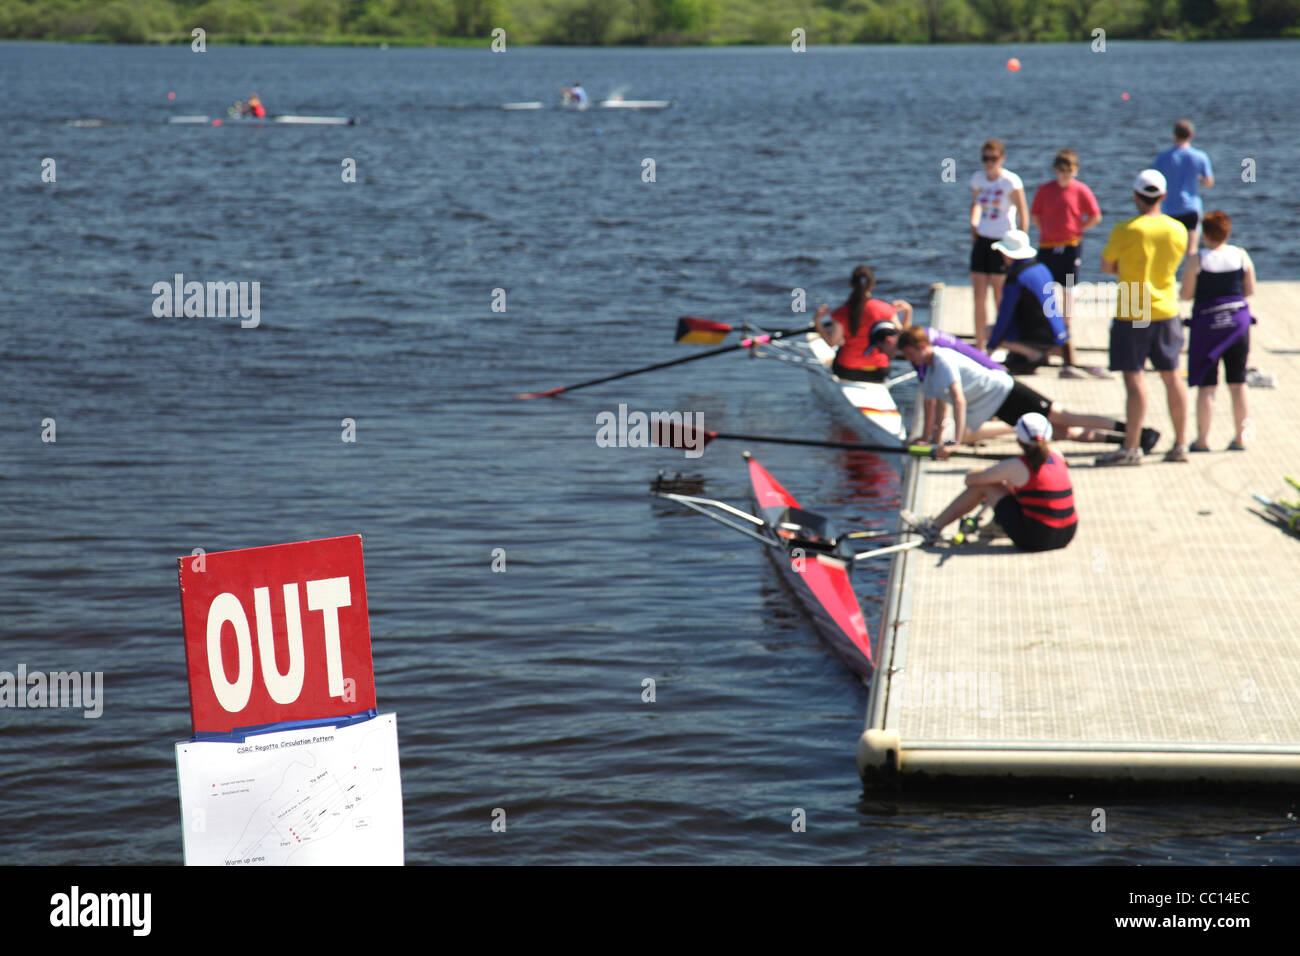 Out Sign at a Rowing Regatta, UK Stock Photo